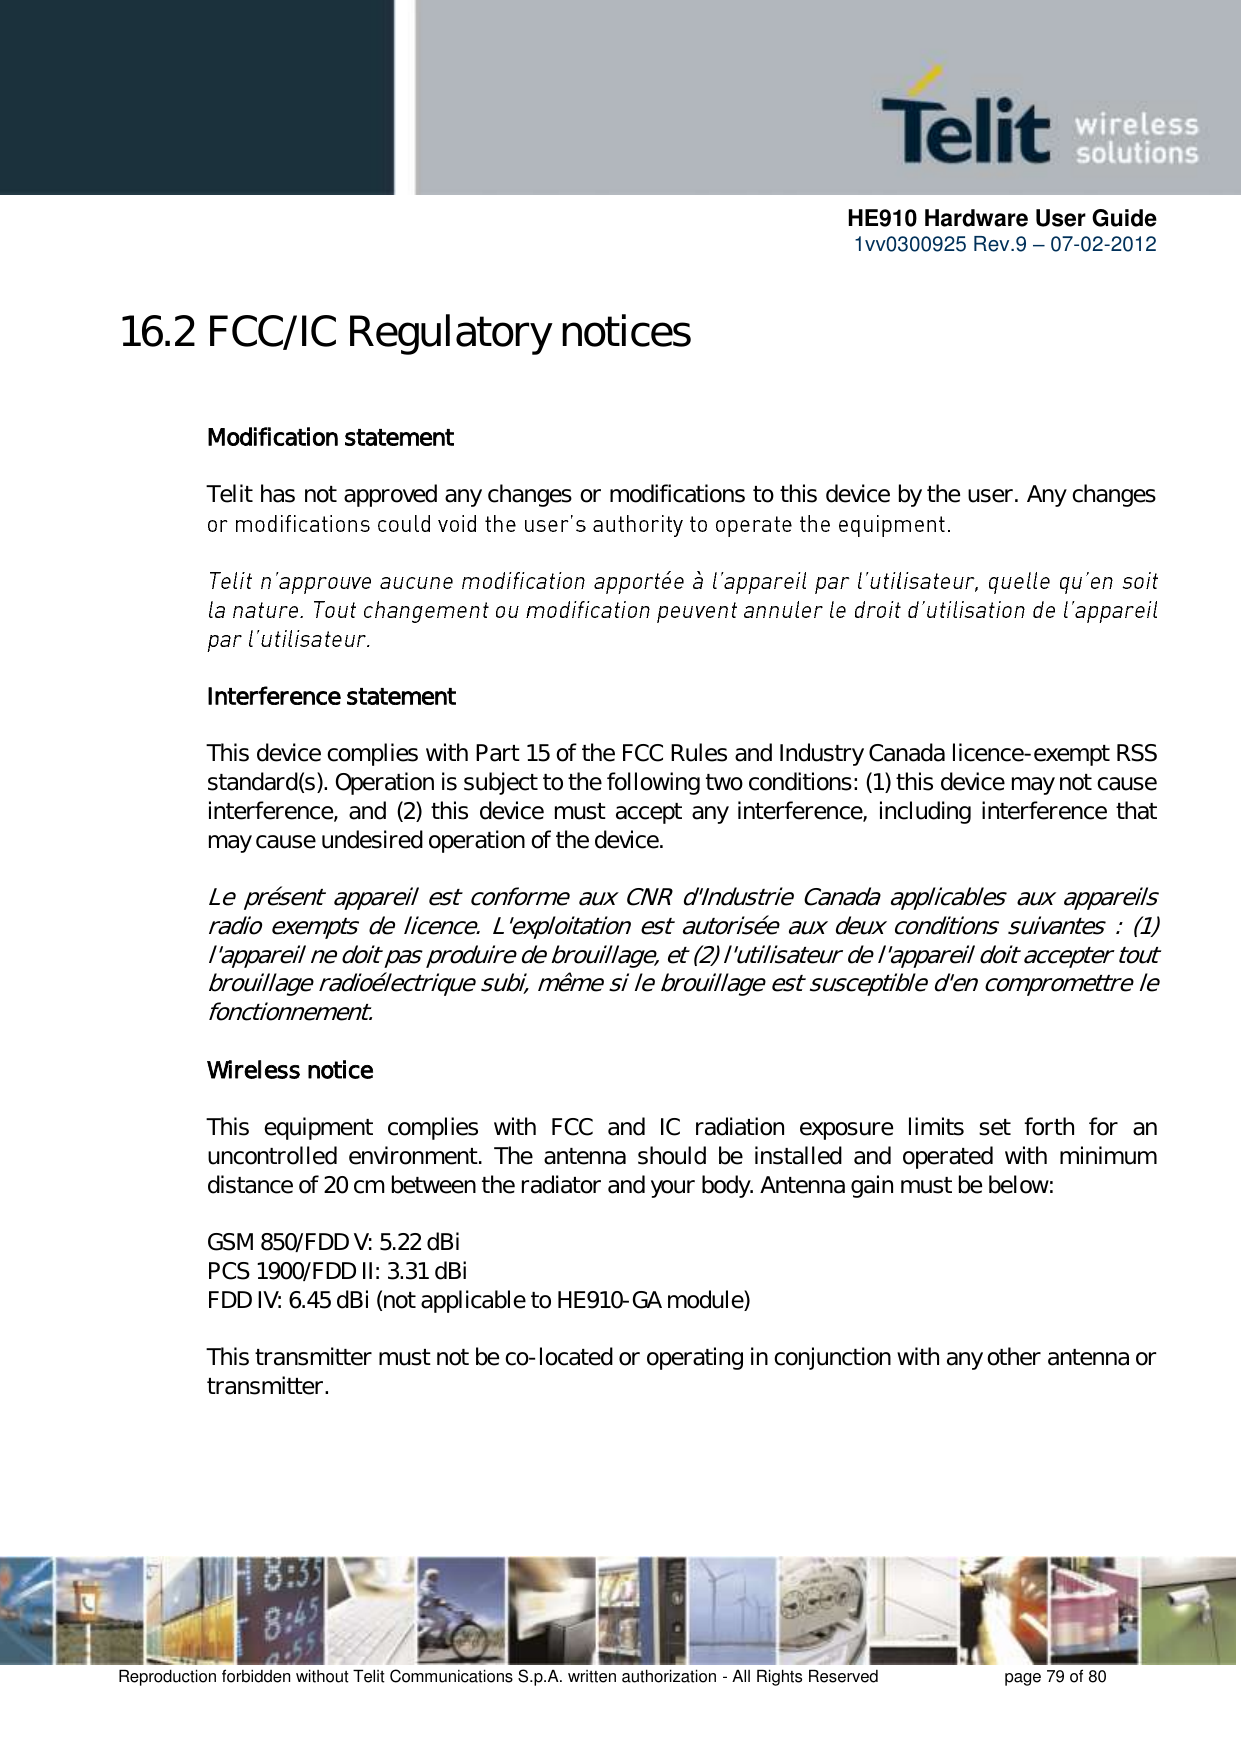      HE910 Hardware User Guide 1vv0300925 Rev.9 – 07-02-2012    Reproduction forbidden without Telit Communications S.p.A. written authorization - All Rights Reserved    page 79 of 80  16.2 FCC/IC Regulatory notices  Modification statement  Telit has not approved any changes or modifications to this device by the user. Any changes     Interference statement  This device complies with Part 15 of the FCC Rules and Industry Canada licence-exempt RSS standard(s). Operation is subject to the following two conditions: (1) this device may not cause interference, and (2) this device must accept any interference, including interference that may cause undesired operation of the device.  Le  présent appareil  est  conforme  aux  CNR  d&apos;Industrie Canada  applicables  aux  appareils radio exempts  de  licence. L&apos;exploitation est autorisée aux deux conditions suivantes : (1) l&apos;appareil ne doit pas produire de brouillage, et (2) l&apos;utilisateur de l&apos;appareil doit accepter tout brouillage radioélectrique subi, même si le brouillage est susceptible d&apos;en compromettre le fonctionnement.  Wireless notice  This  equipment  complies  with  FCC  and  IC  radiation  exposure  limits  set  forth  for  an uncontrolled  environment.  The  antenna  should  be  installed  and  operated  with  minimum distance of 20 cm between the radiator and your body. Antenna gain must be below:  GSM 850/FDD V: 5.22 dBi PCS 1900/FDD II: 3.31 dBi FDD IV: 6.45 dBi (not applicable to HE910-GA module)  This transmitter must not be co-located or operating in conjunction with any other antenna or transmitter.  